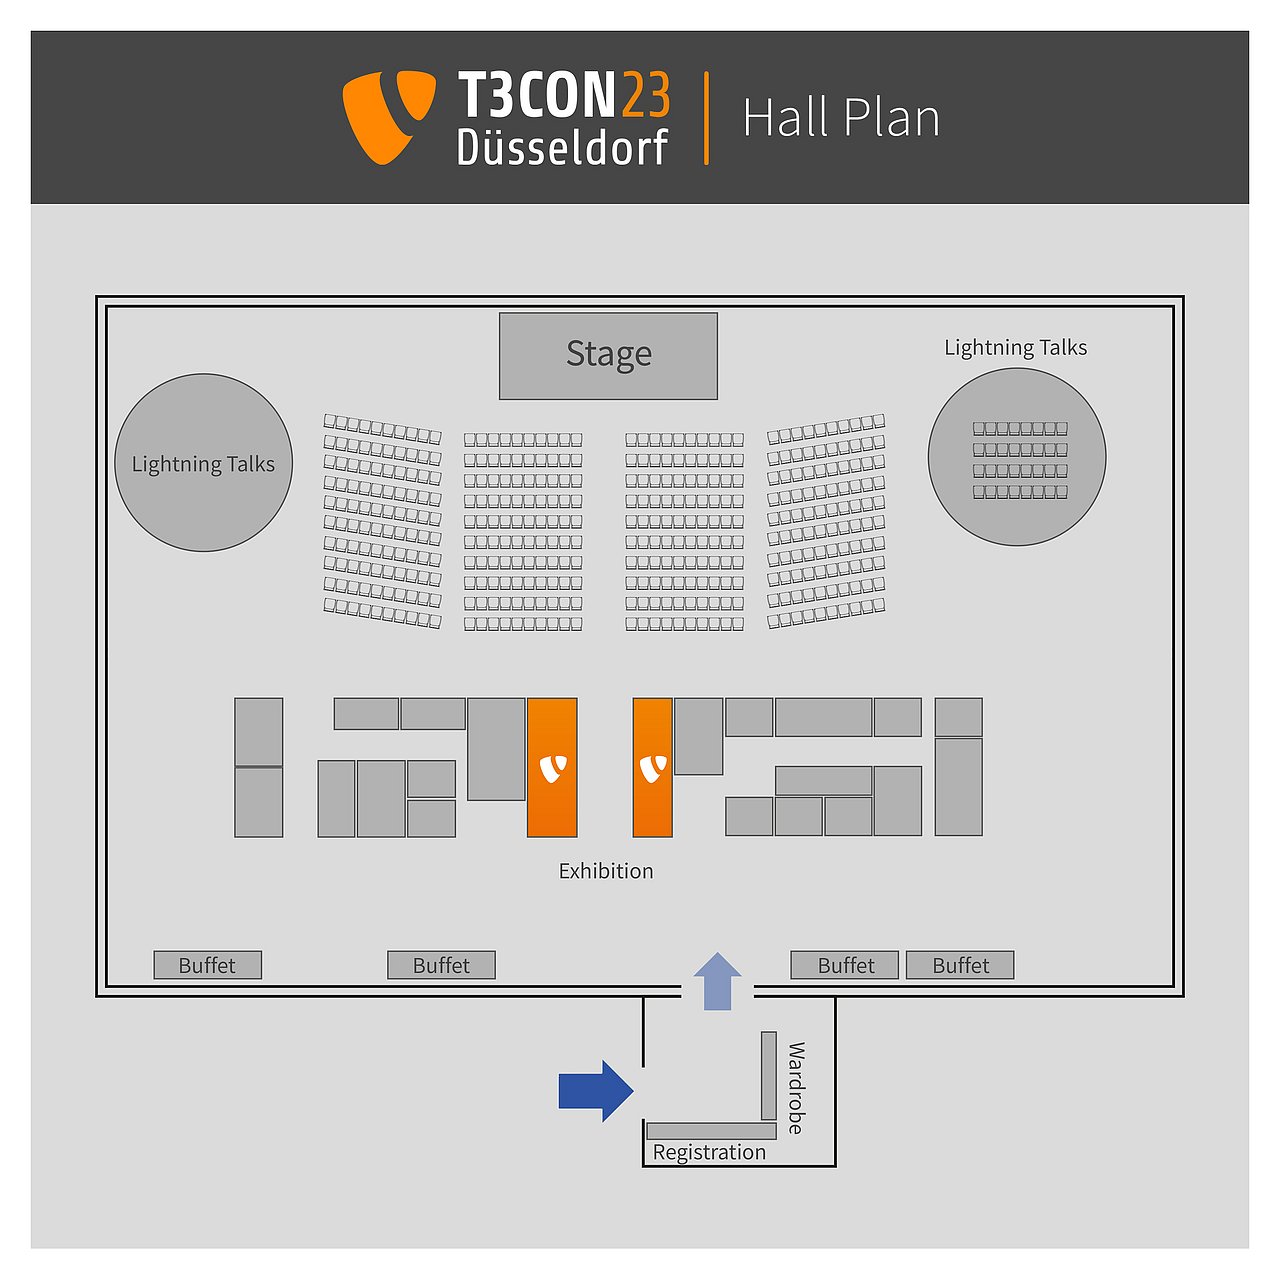 Hall Plan of the TYPO3 Conference 2023